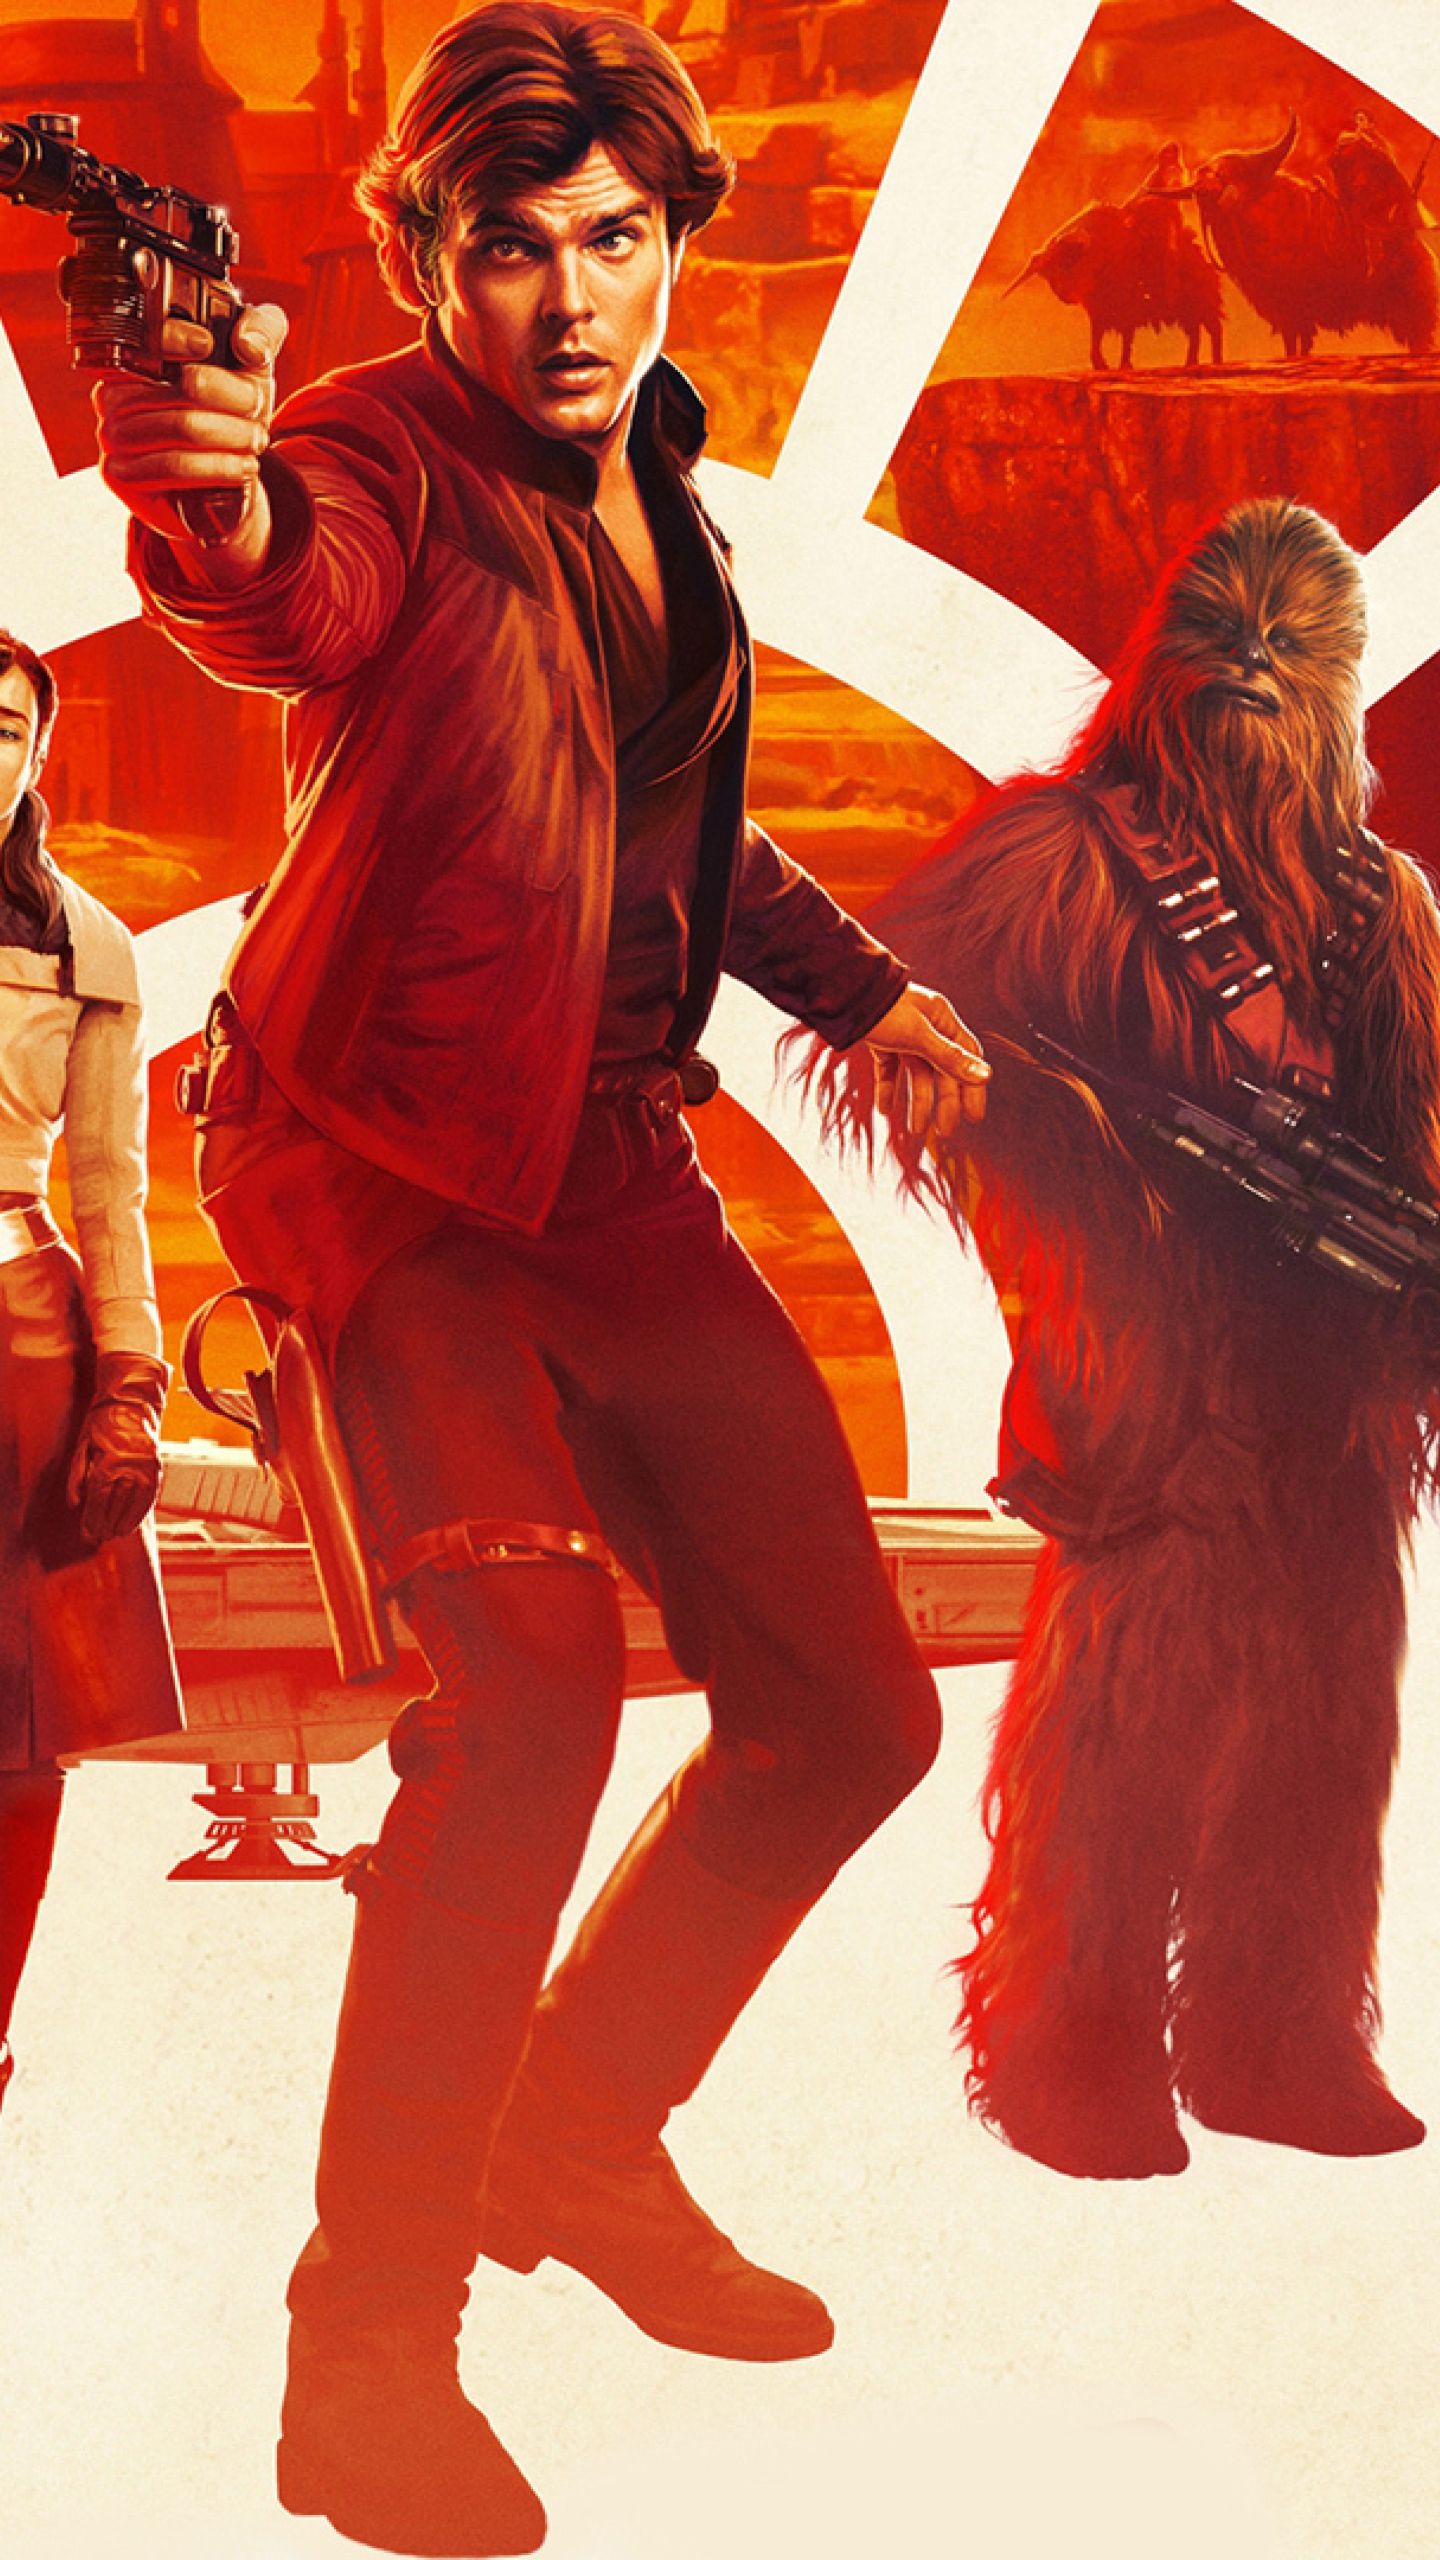 Solo A Star Wars Story Movie Poster 2018 Samsung Galaxy S S Google Pixel XL , Nexus 6P , LG G5 Wallpaper, HD Movies 4K Wallpaper, Image, Photo and Background